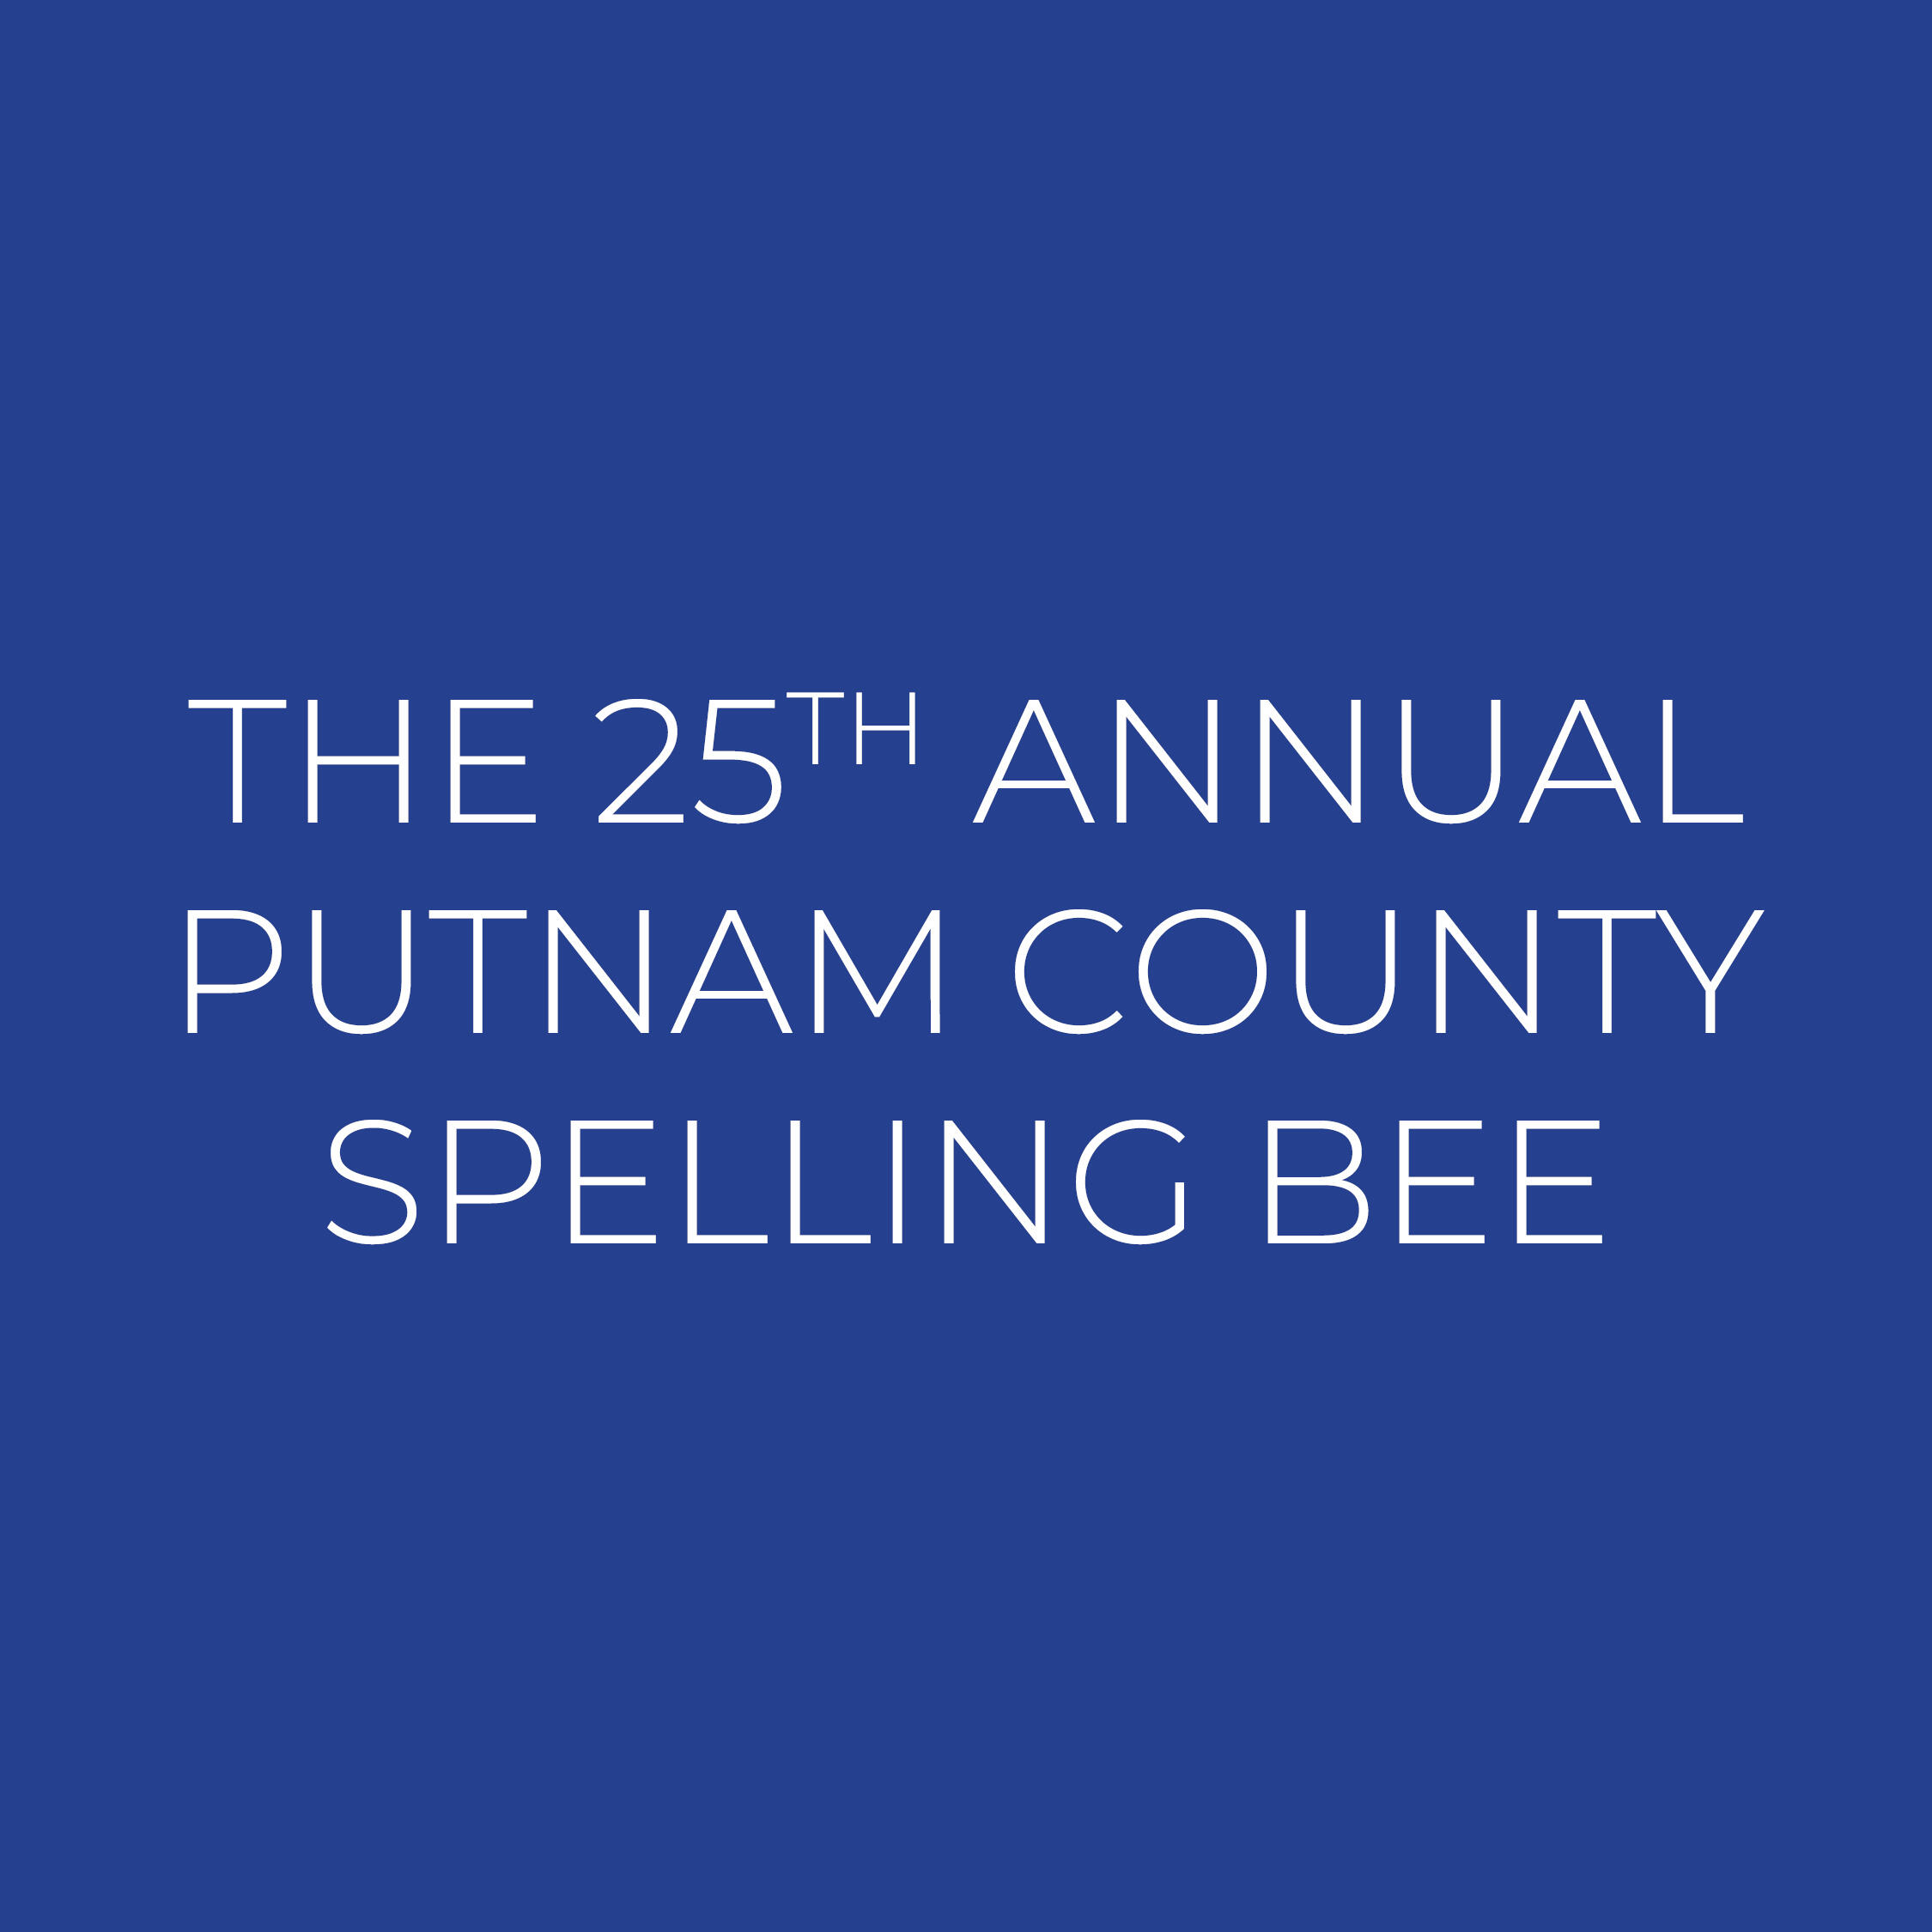 Text that reads "THE 25TH ANNUAL PUTNAM COUNTY SPELLING BEE"